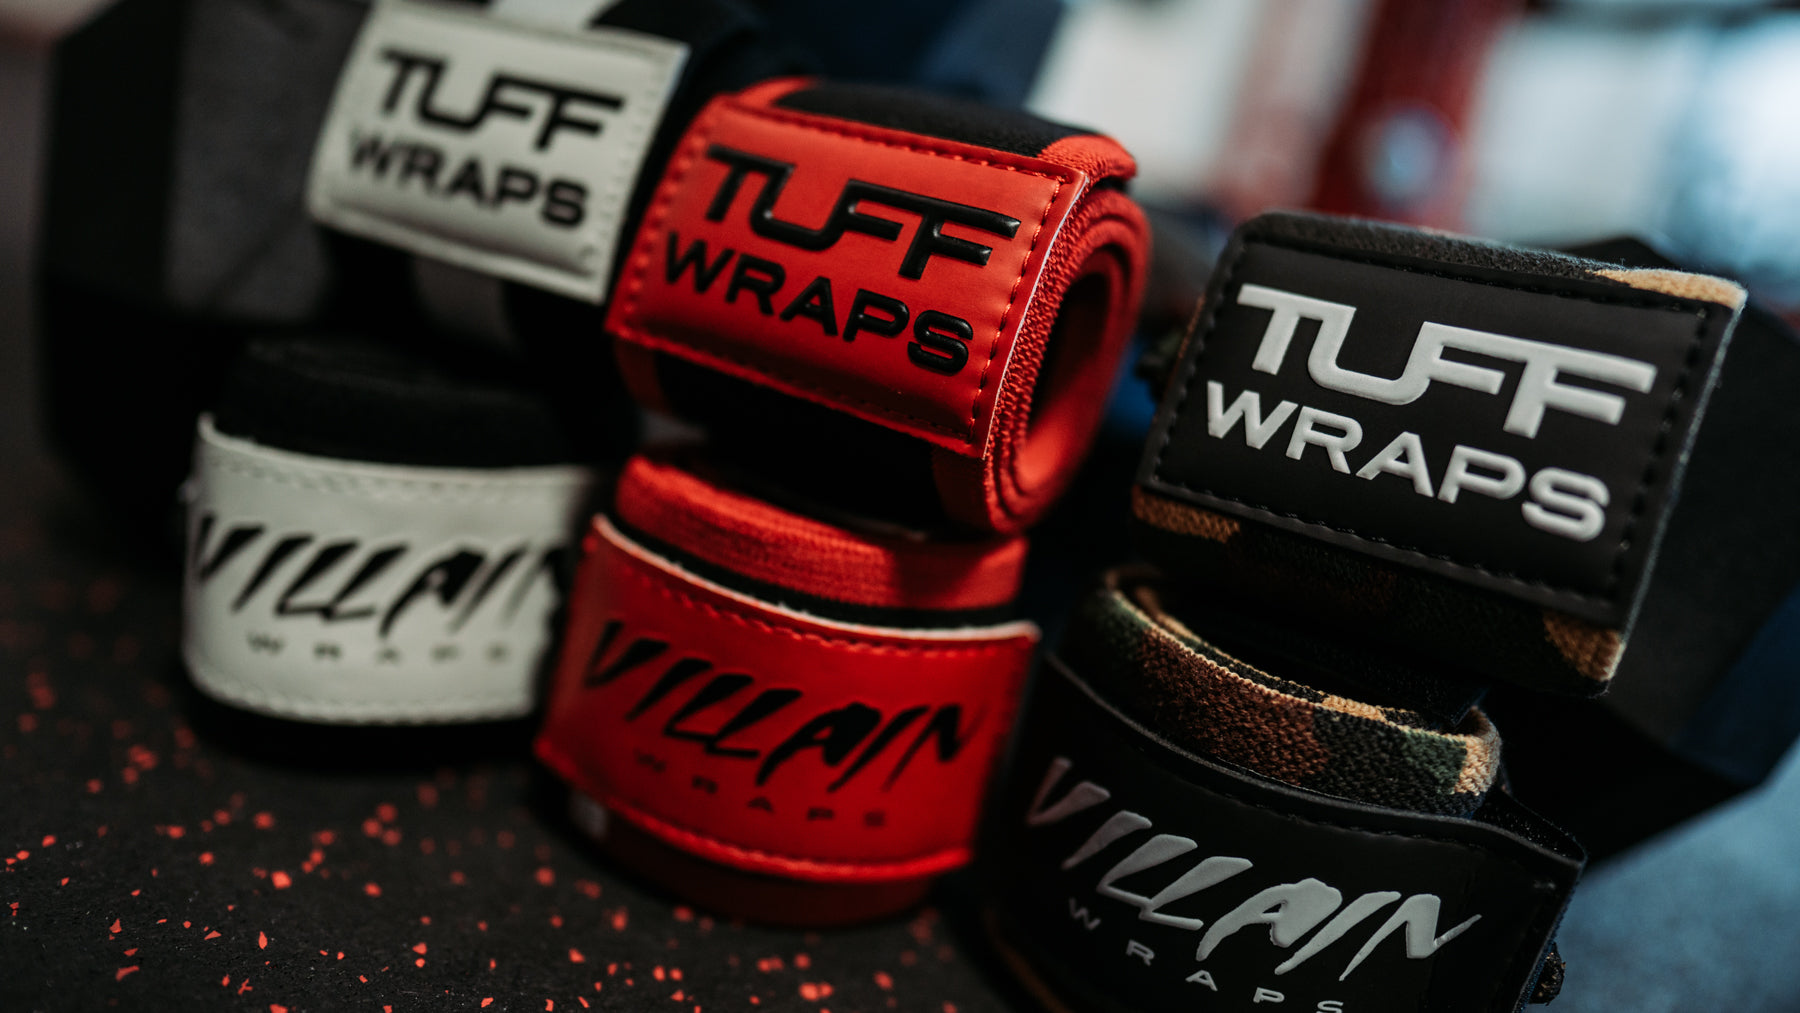 5 Things to Consider When Purchasing Wrist Wraps